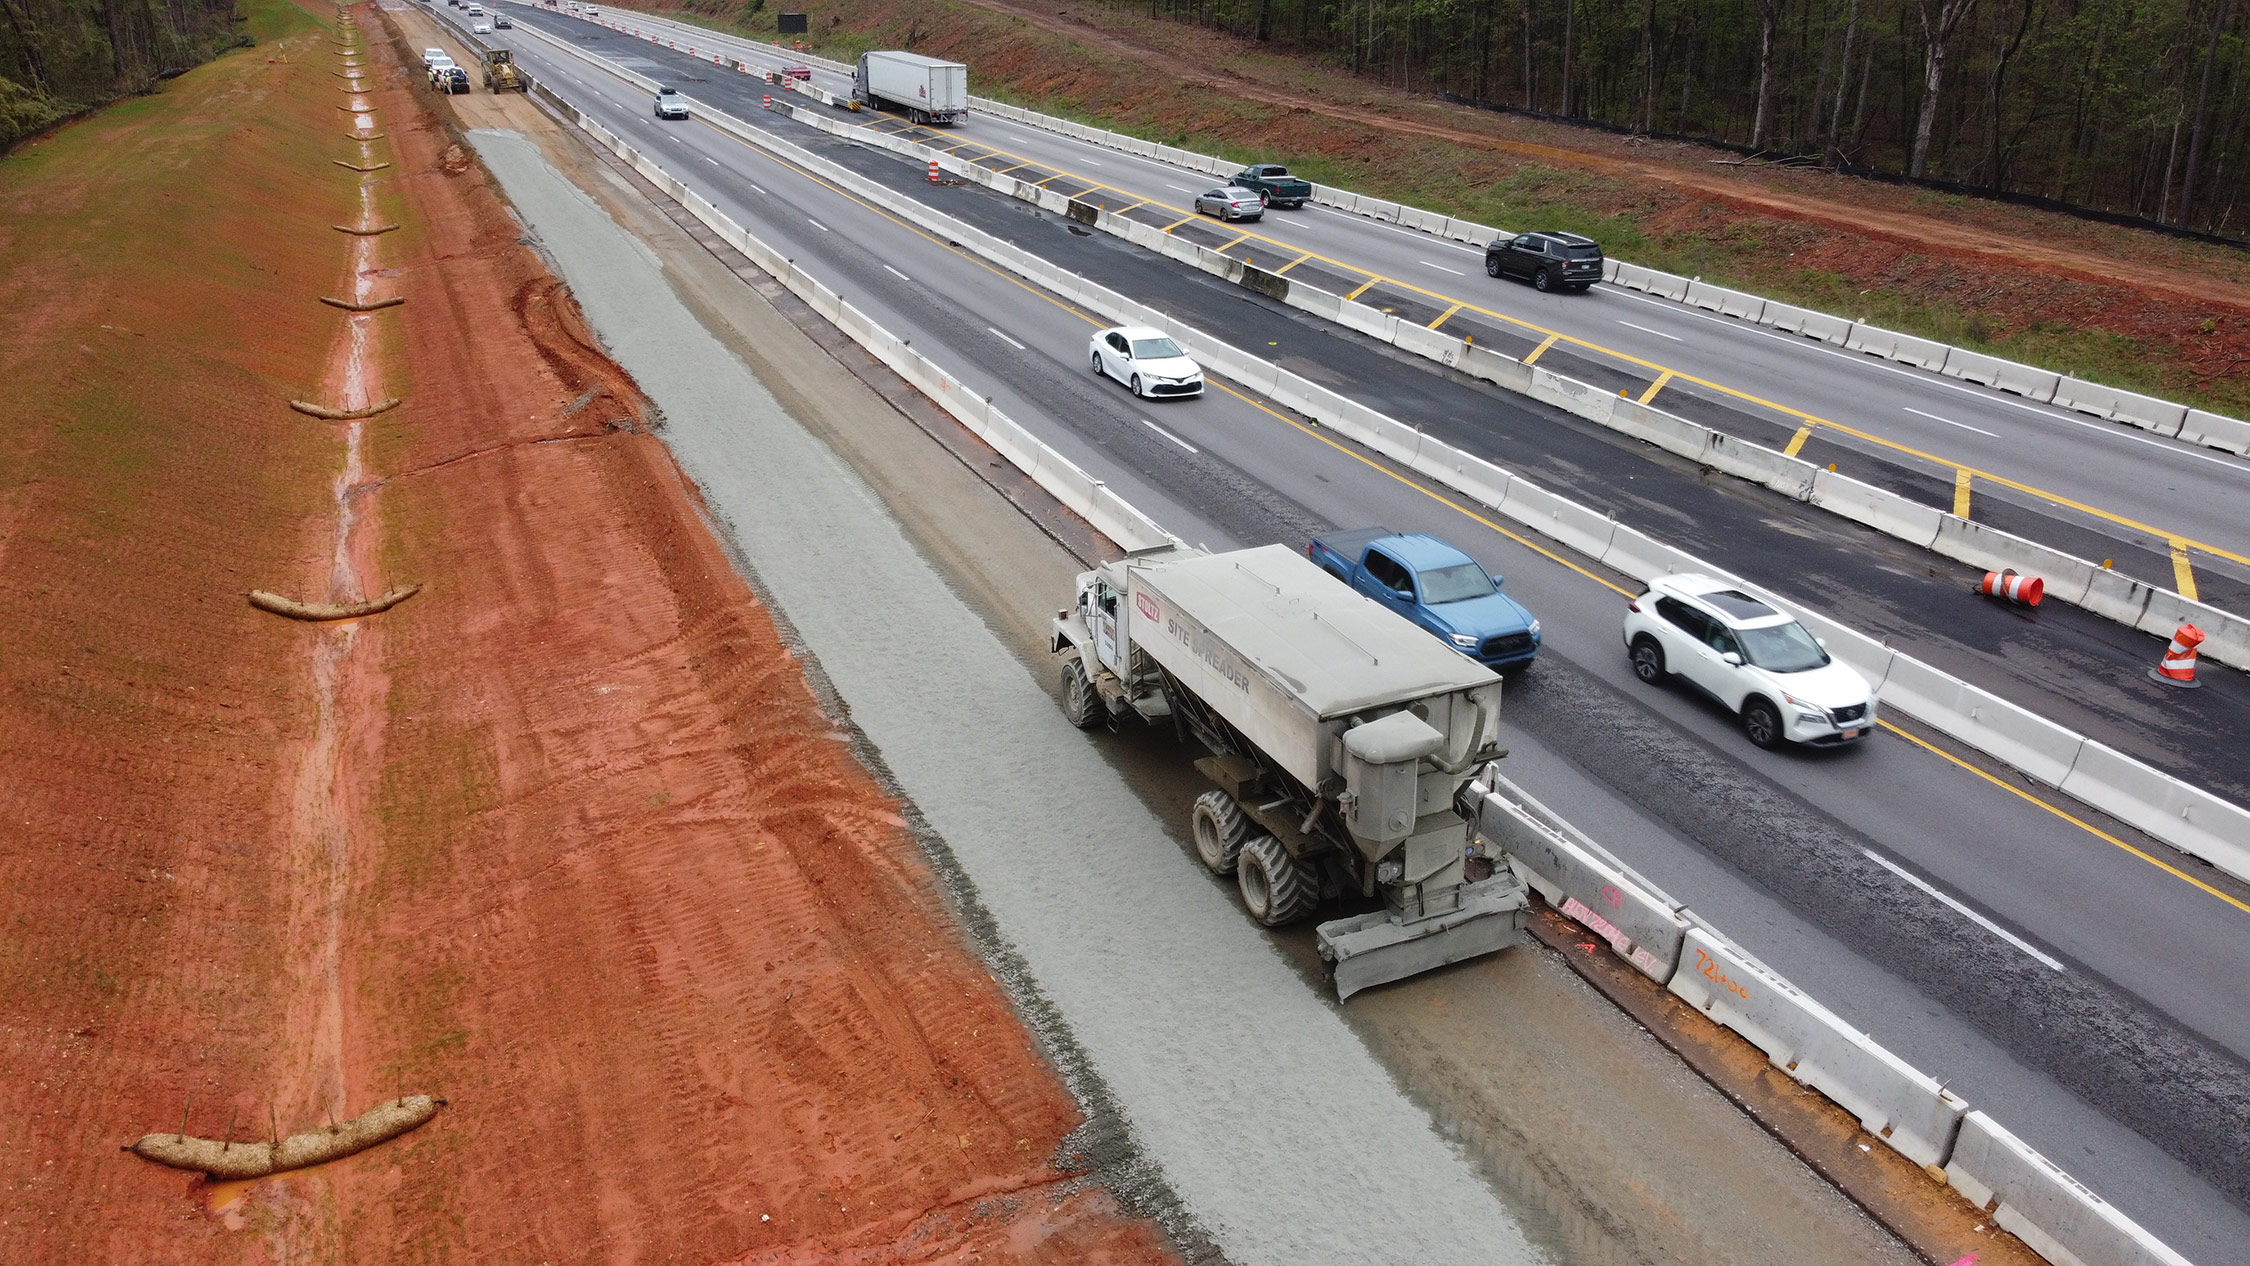 This photo shows the contractor preparing the base for future travel lanes by spreading a layer of cement that is mixed with soil to prepare a solid surface for the pavement structure. This will allow traffic to be shifted to the outside as a part of the staged interstate widening. Upcoming traffic shifts are planned on the westbound lanes between Koon Road and Exit 97.